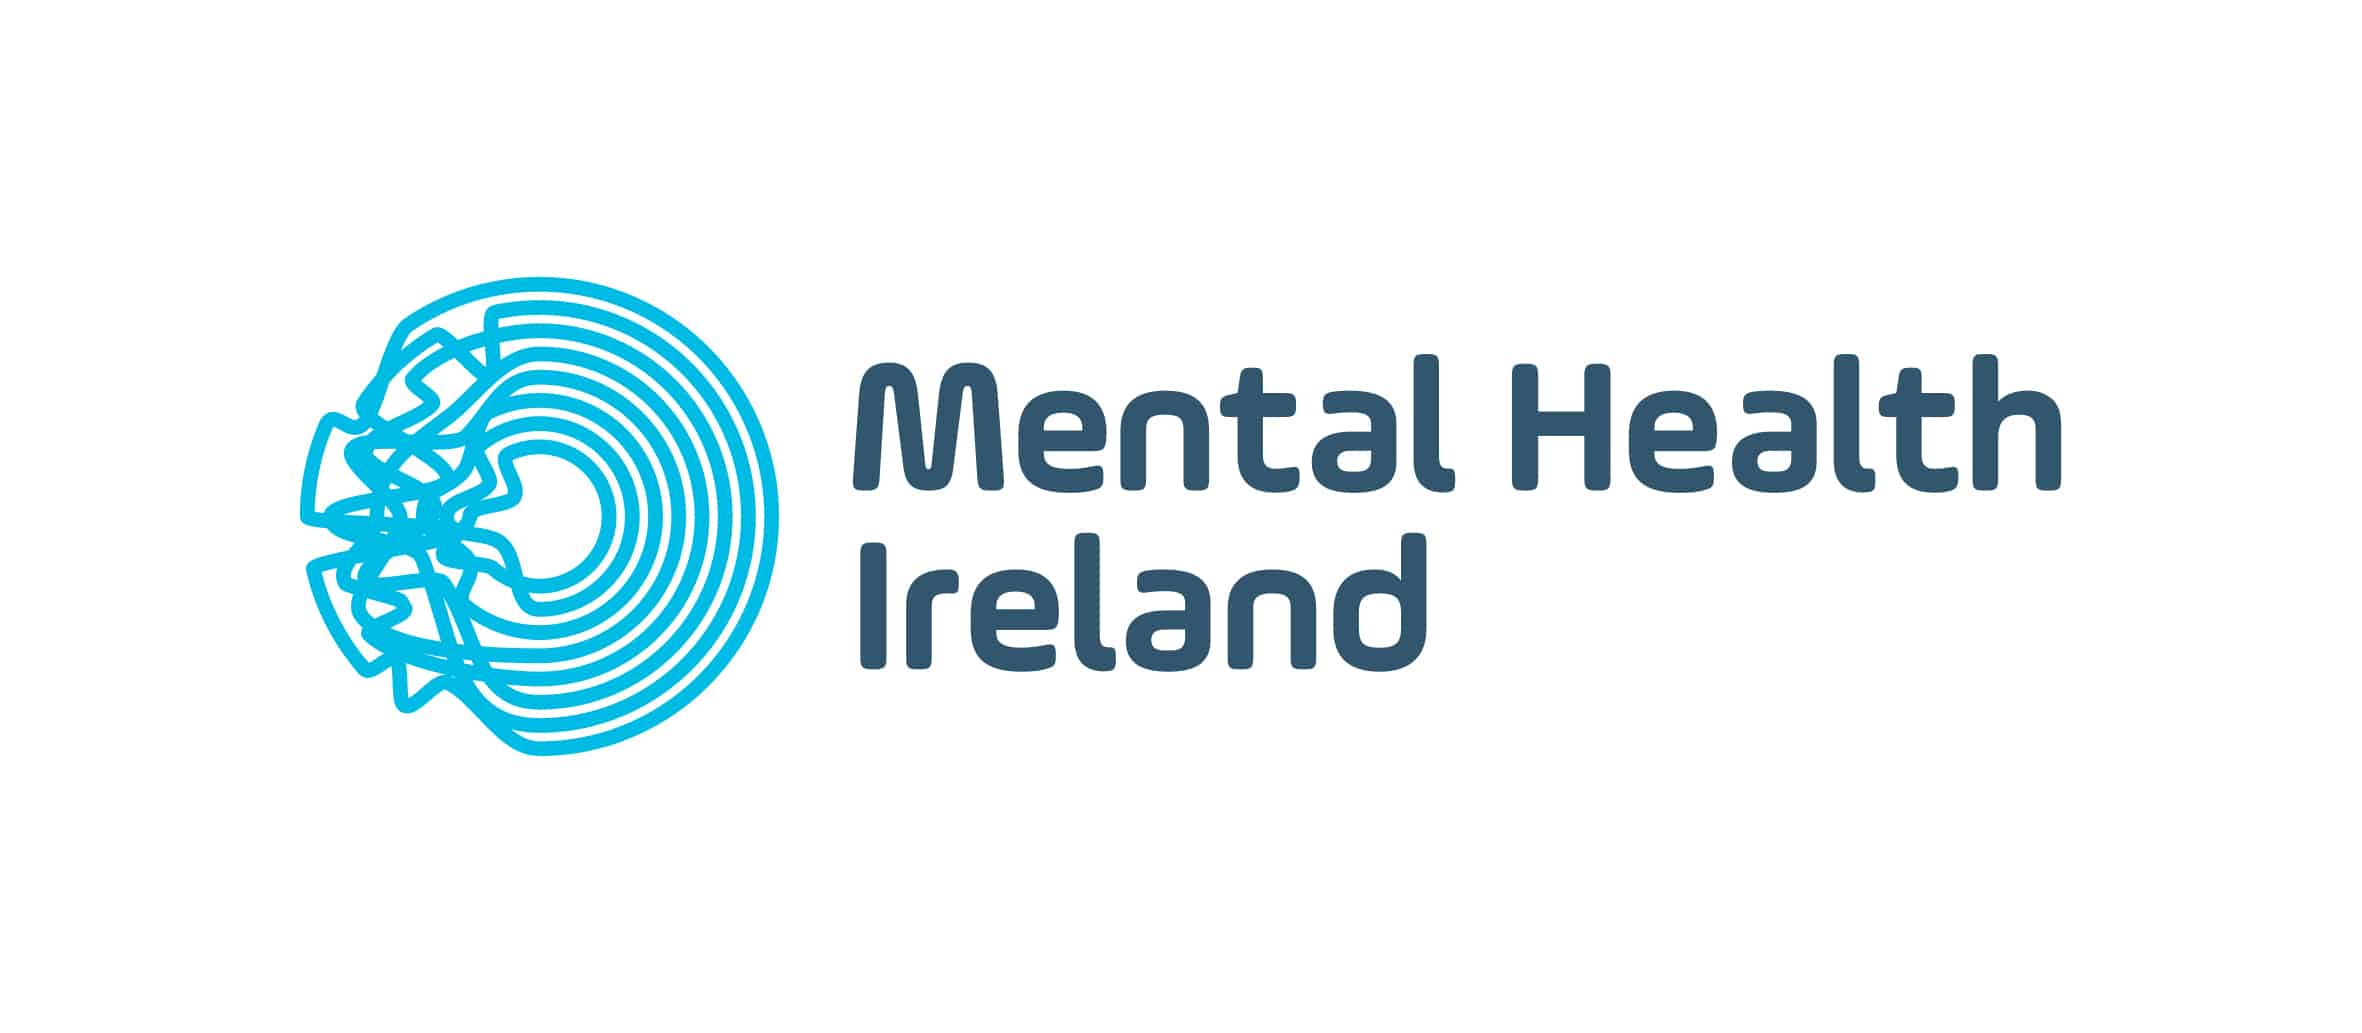 Mental Health Ireland shares Five Actions for Wellbeing during Tough Times